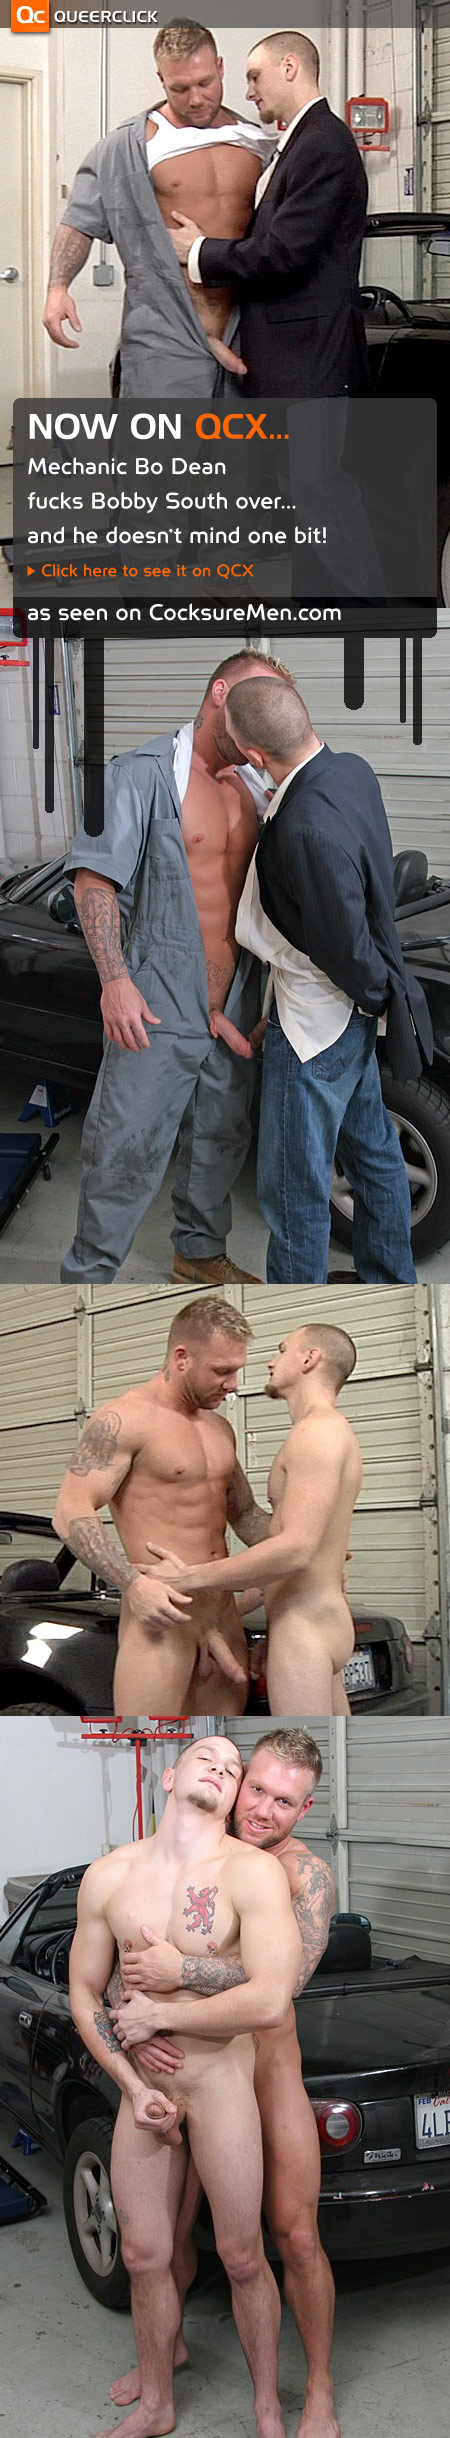  Bo Dean Inspects Bobby South and Lubes Him Up at Cocksure Men